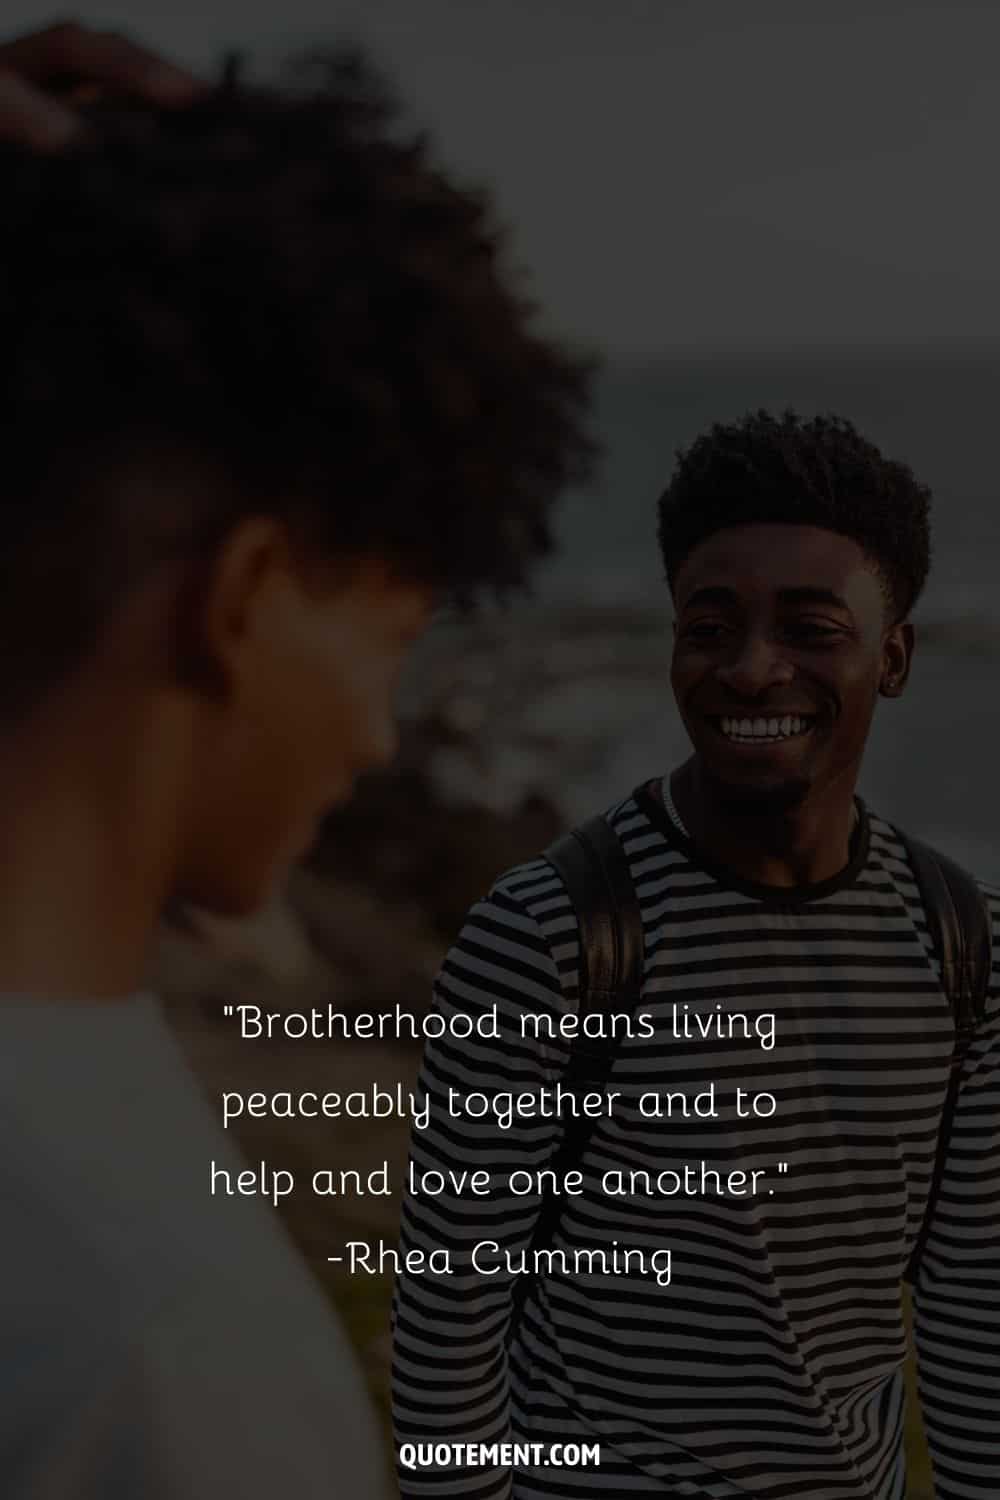 two smiling guys image representing inspirational quote on brotherhood